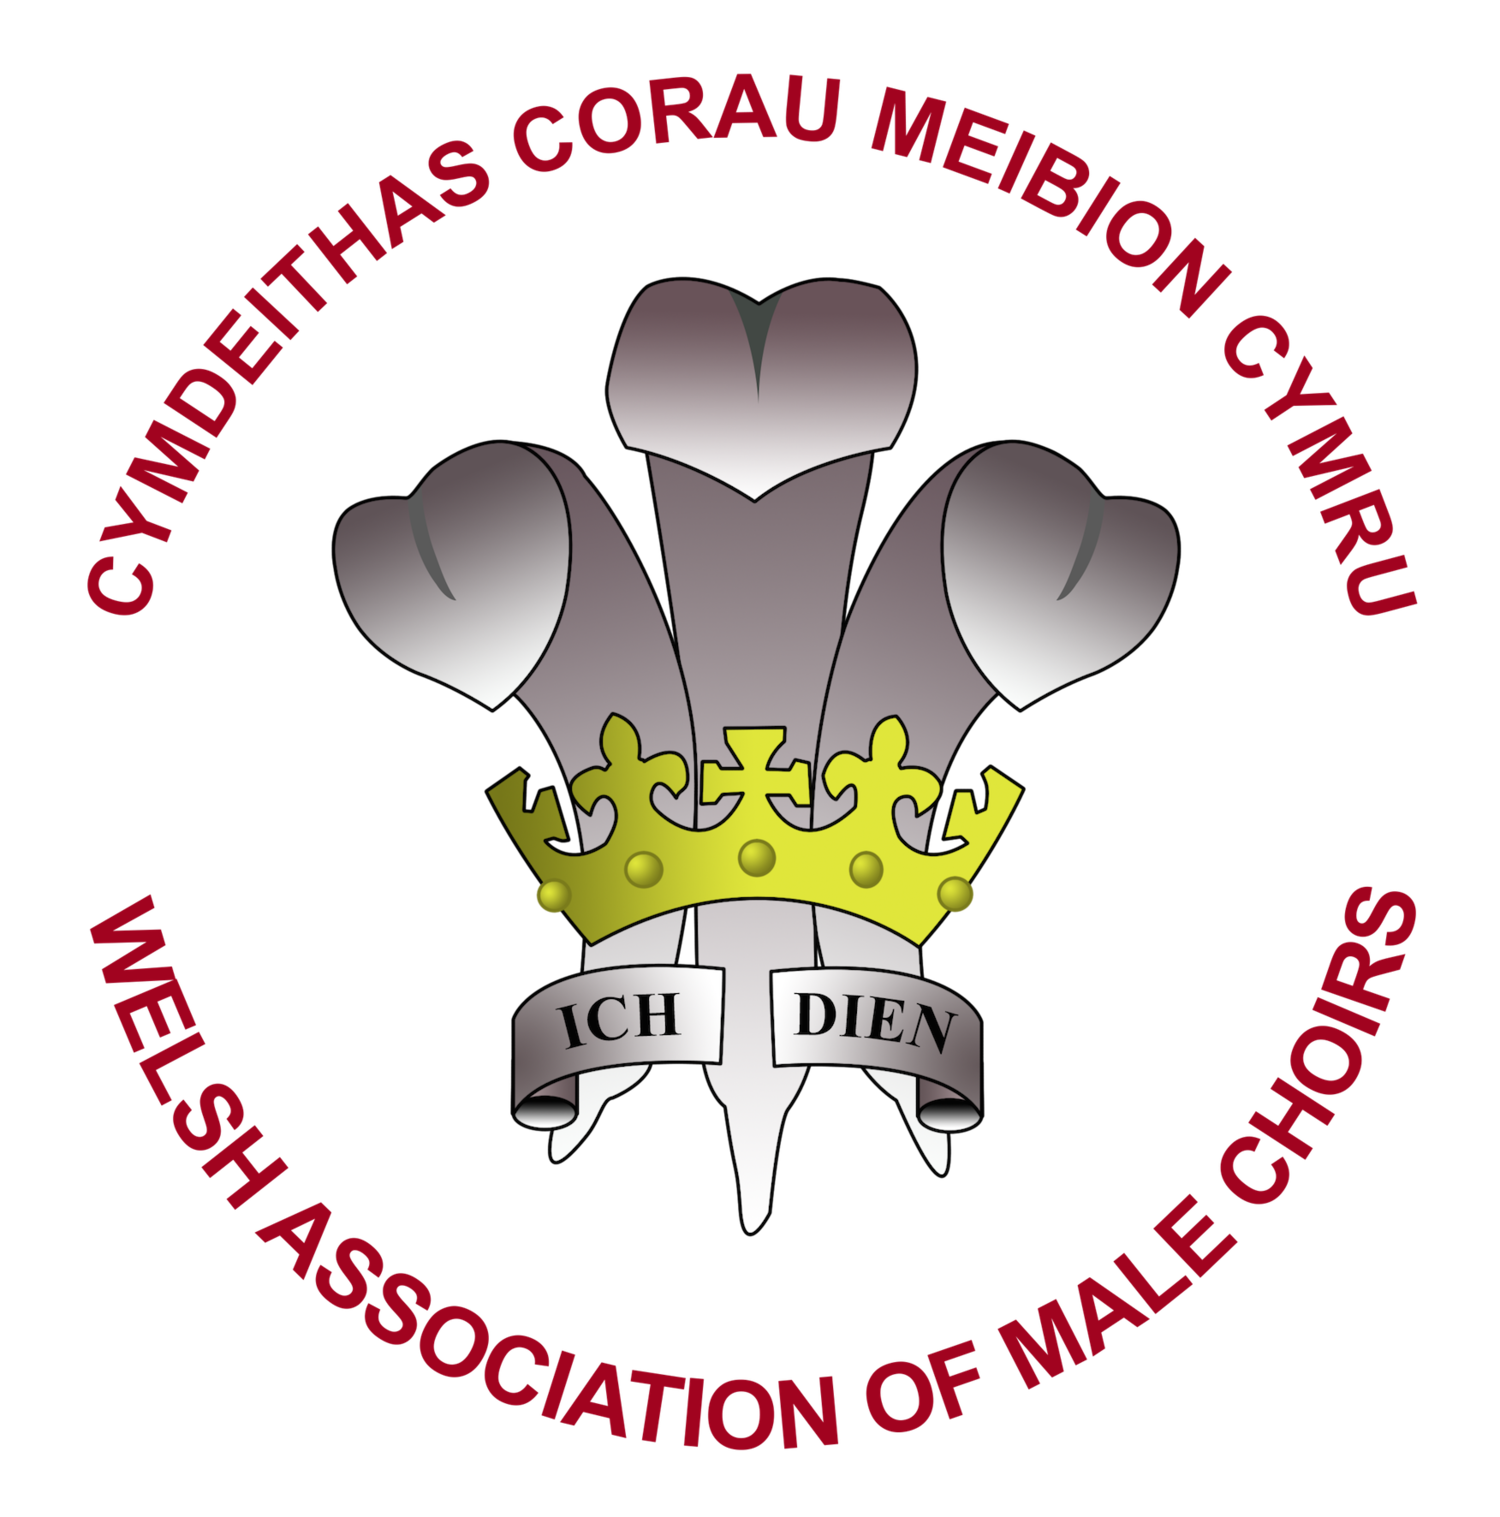 Welsh Assocation of Male Choirs